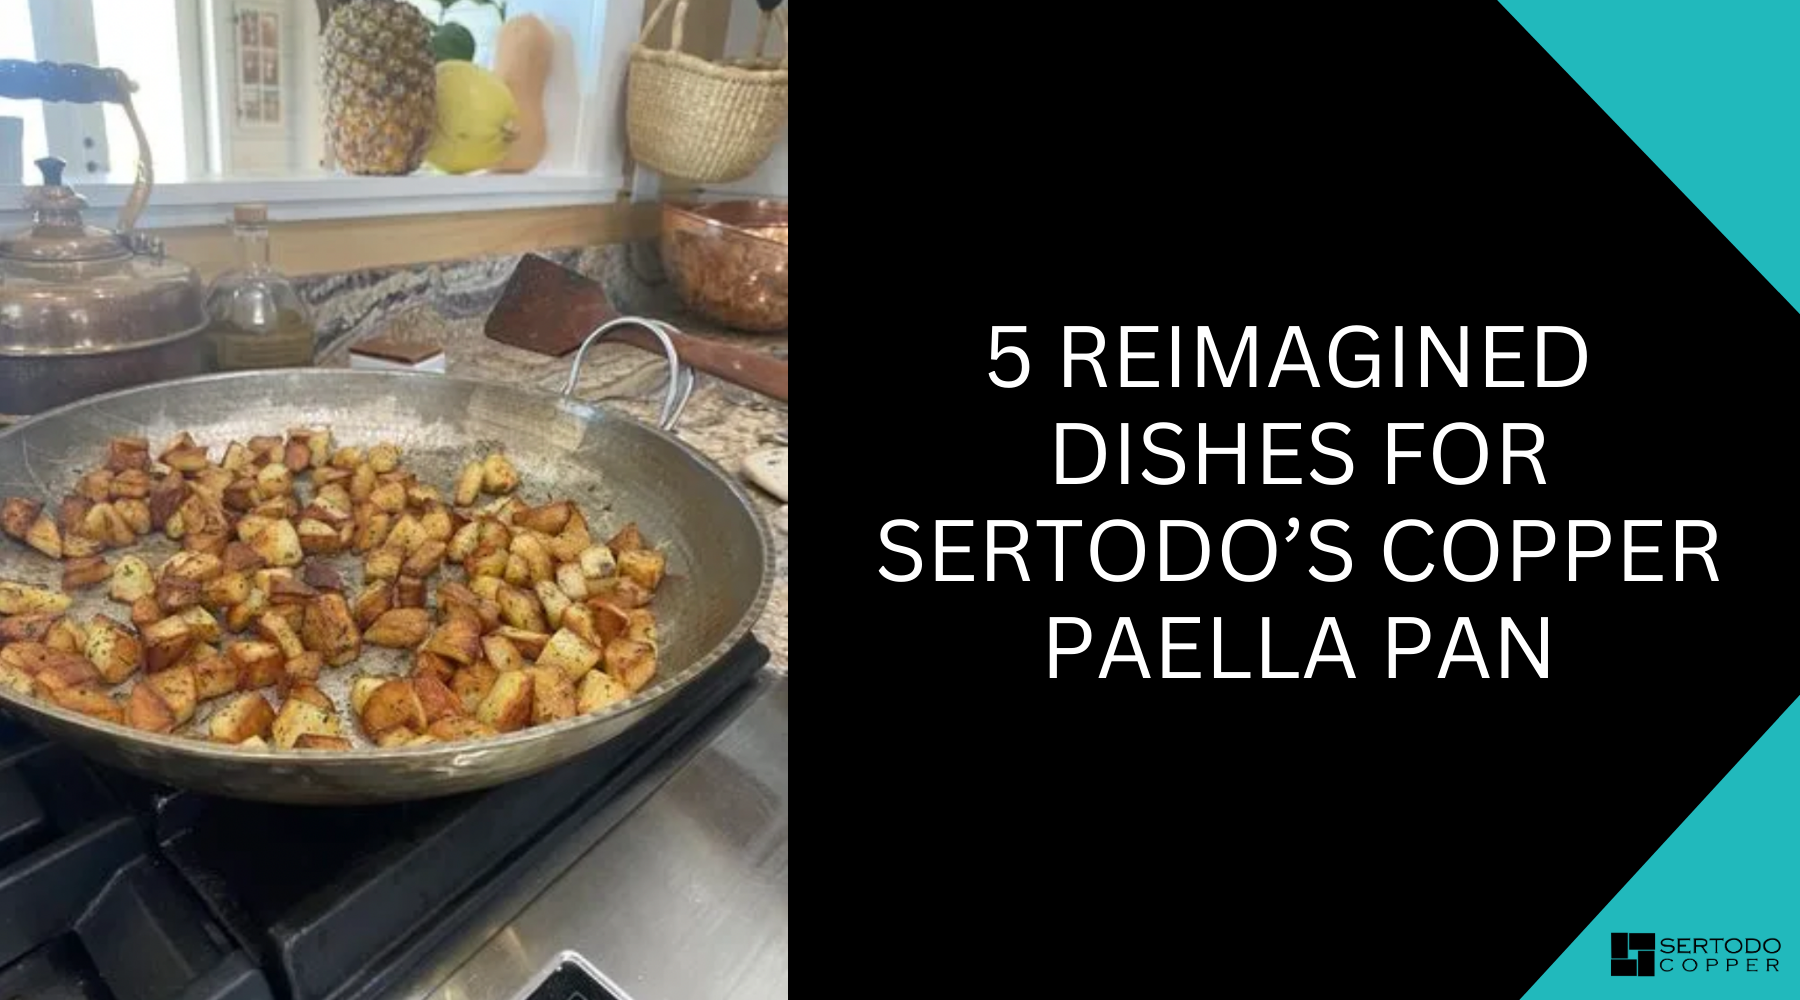 Reimagined dishes for copper paella pan